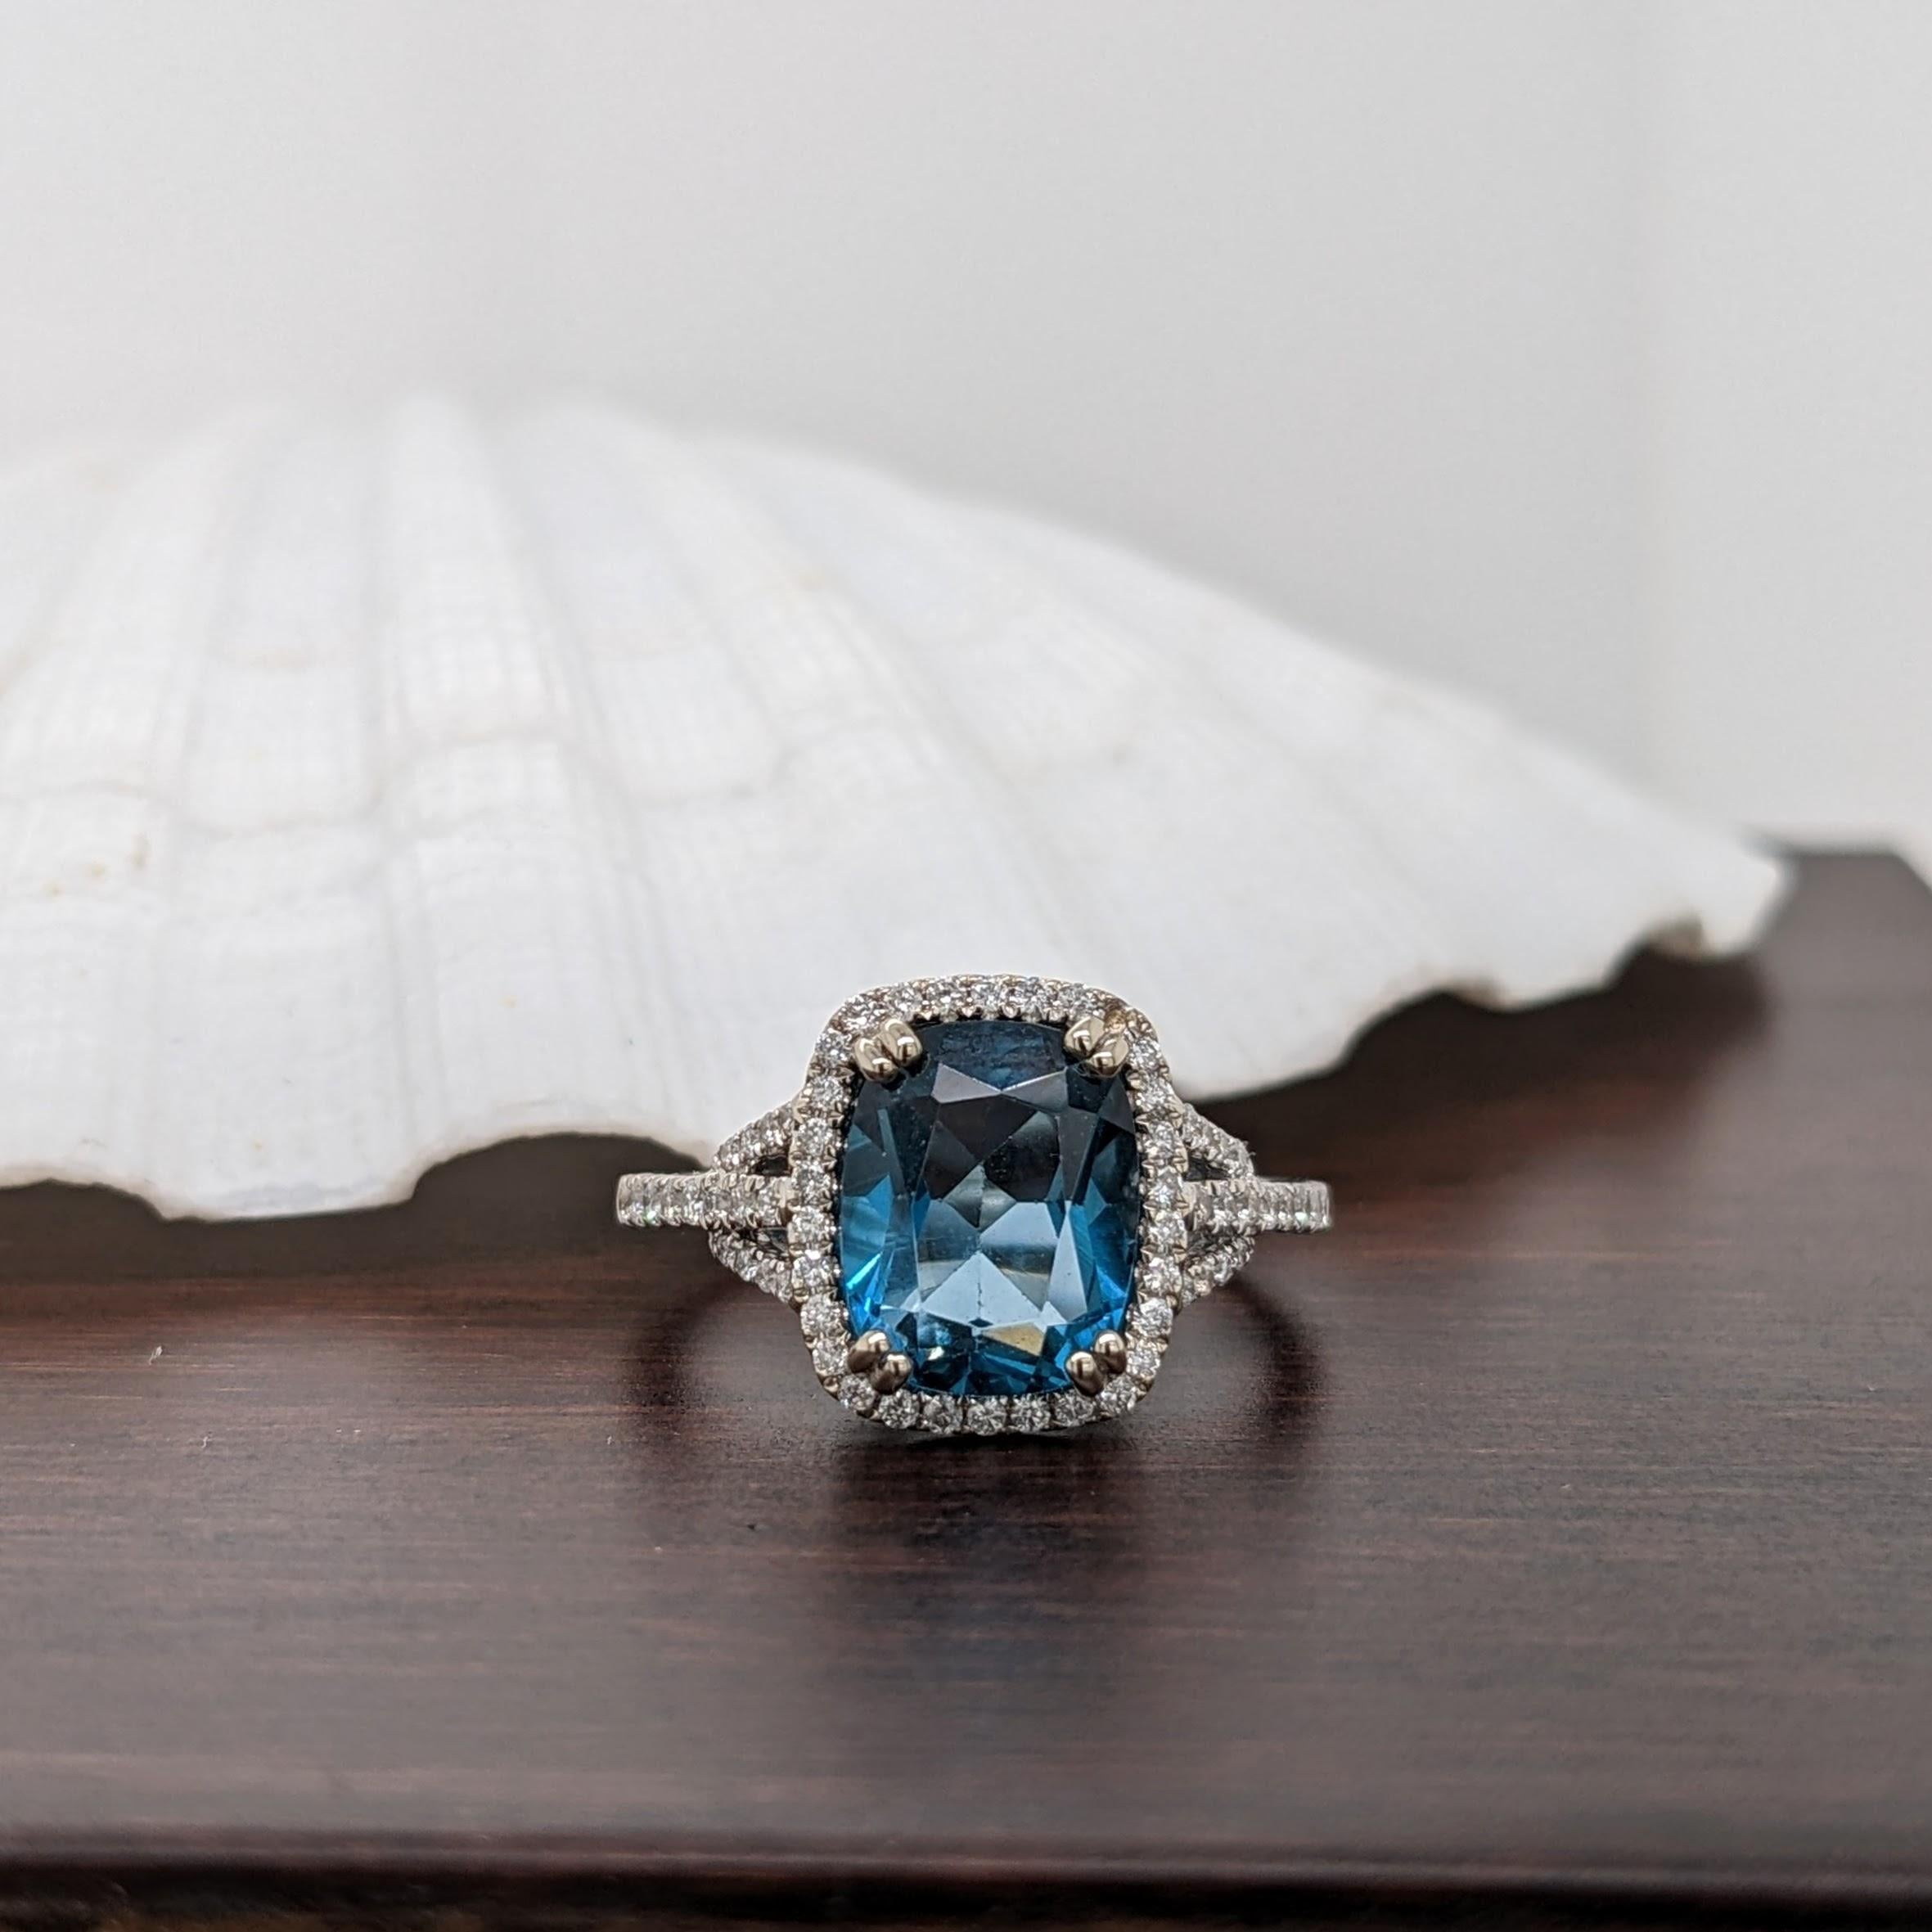 This beautiful ring features a London Blue Topaz in 14k White Gold with a beautiful halo of natural earth-mined Diamond accents. A statement ring design perfect for an eye catching engagement or anniversary. This ring also makes a beautiful December